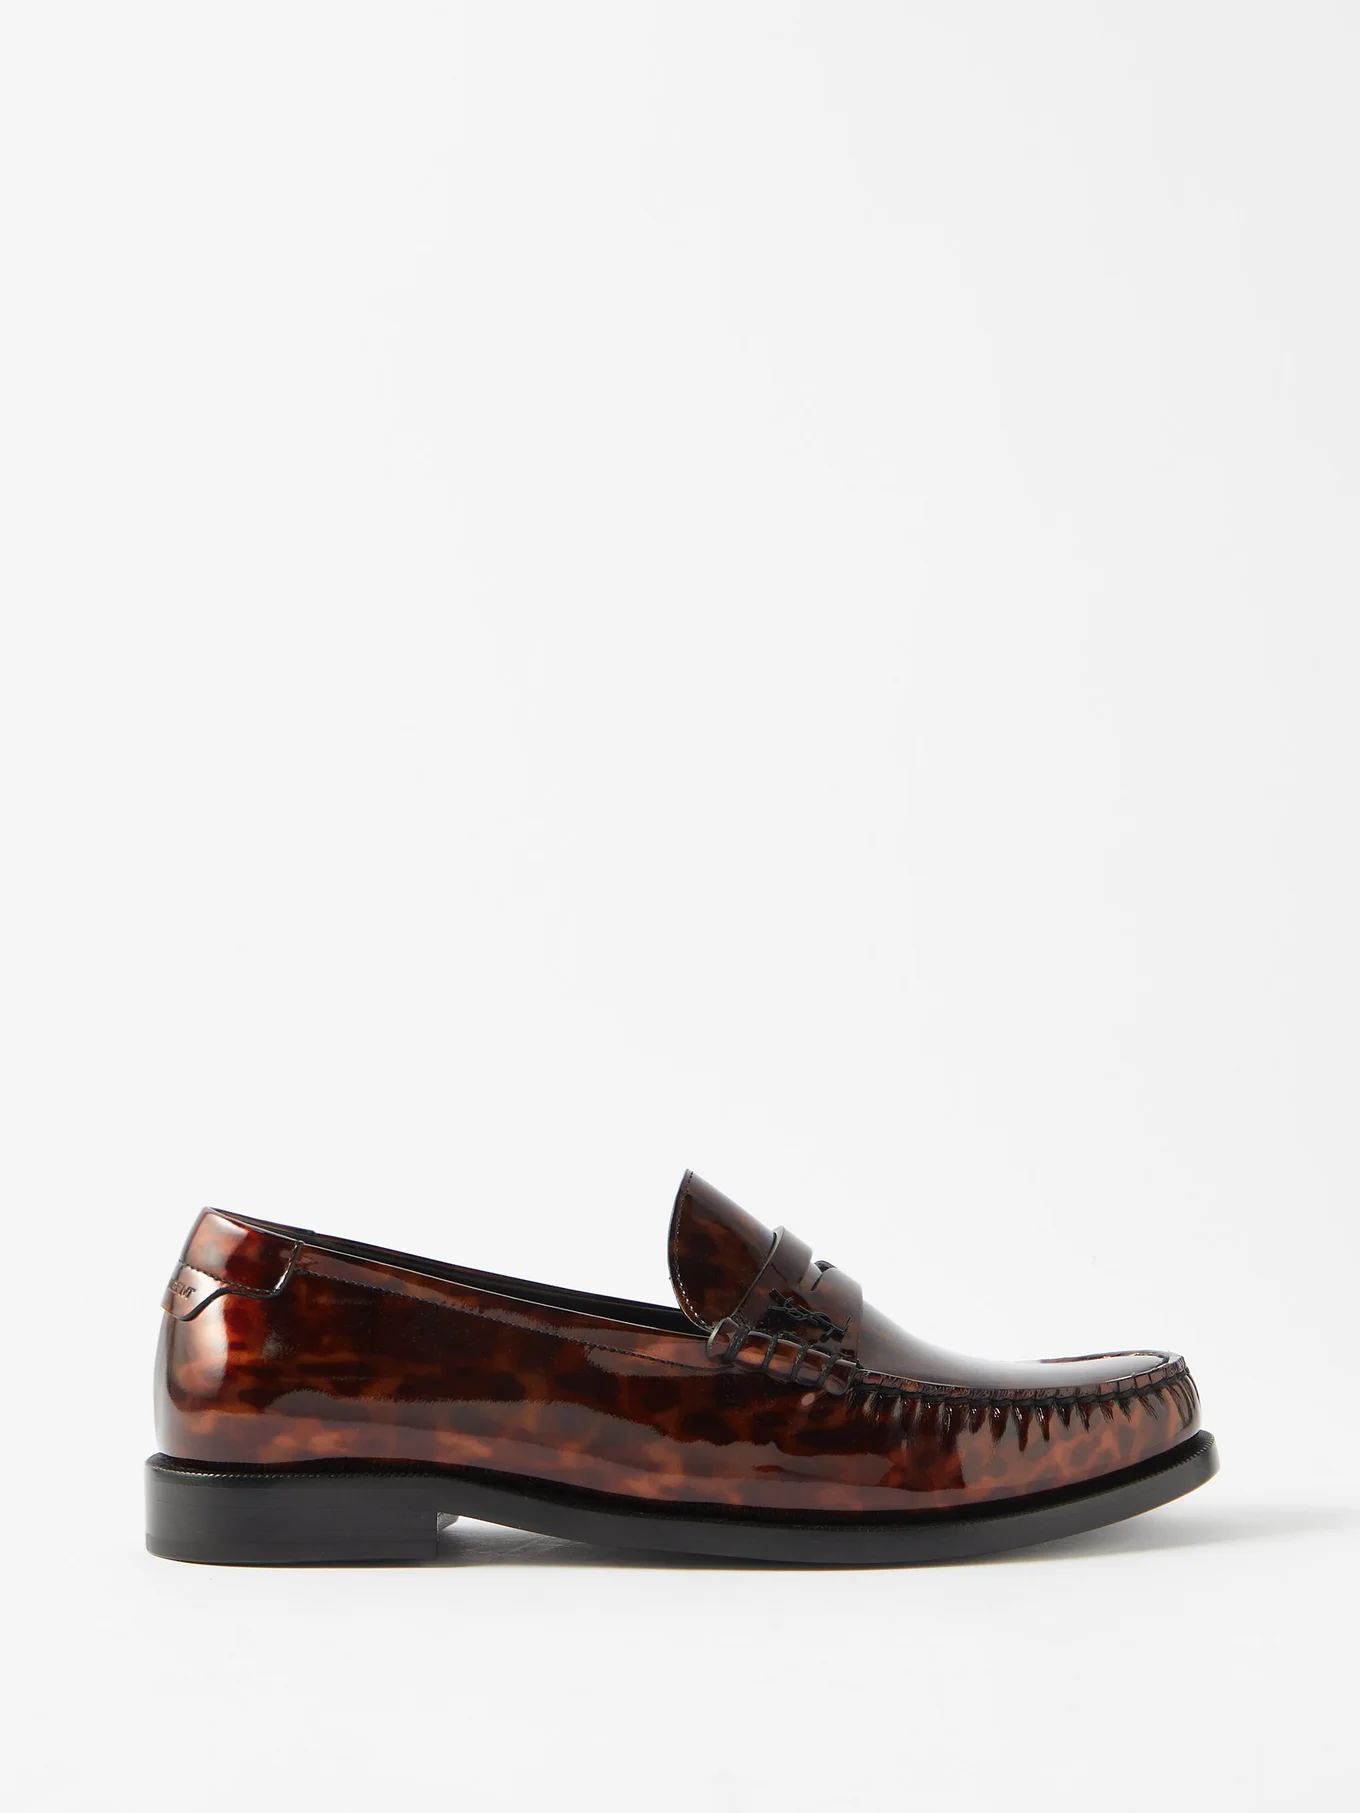 Le Loafer tortoiseshell-effect leather loafers | Saint Laurent | Matches (UK)